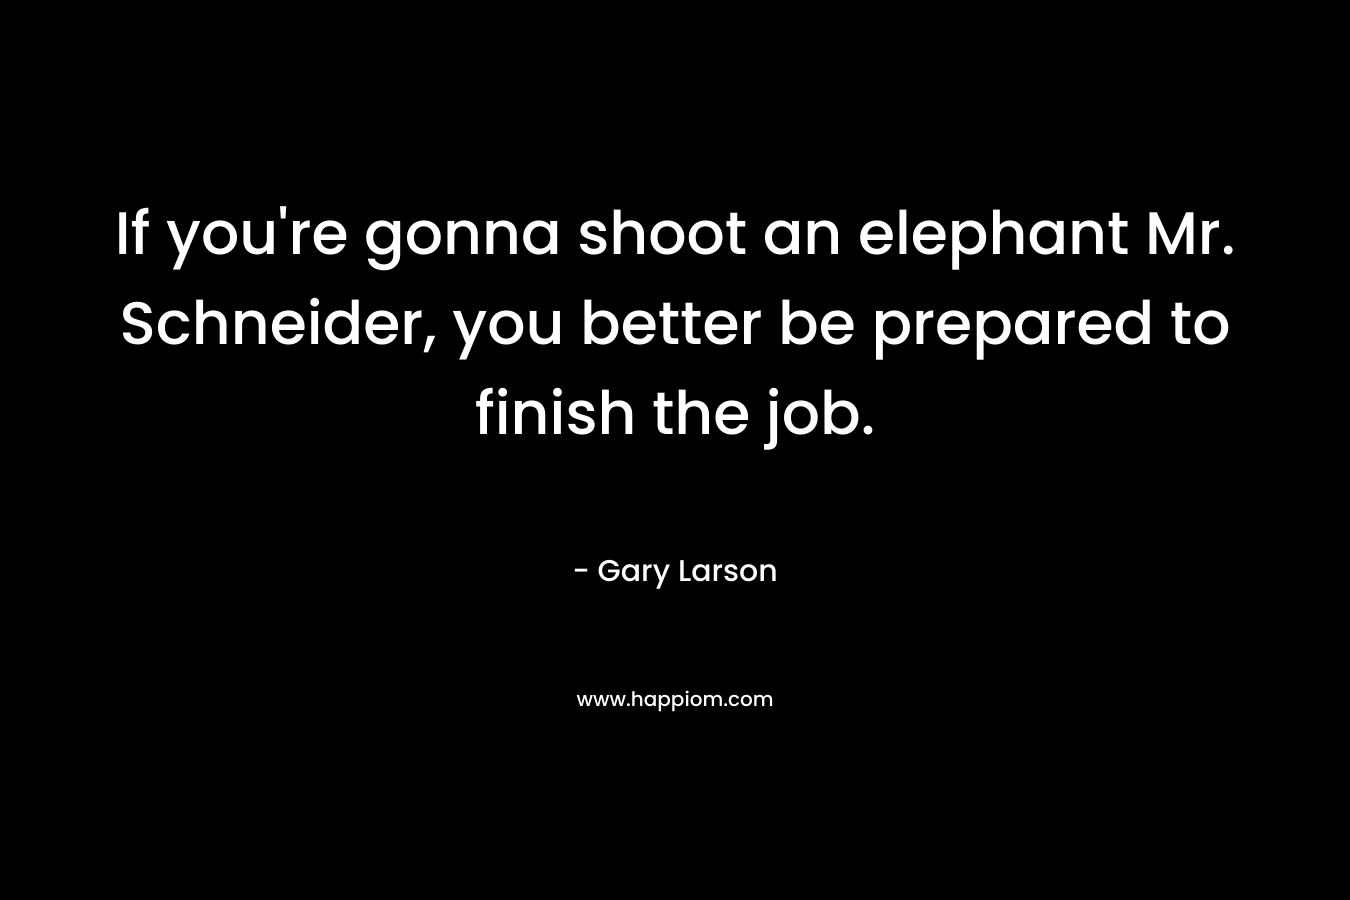 If you’re gonna shoot an elephant Mr. Schneider, you better be prepared to finish the job. – Gary Larson